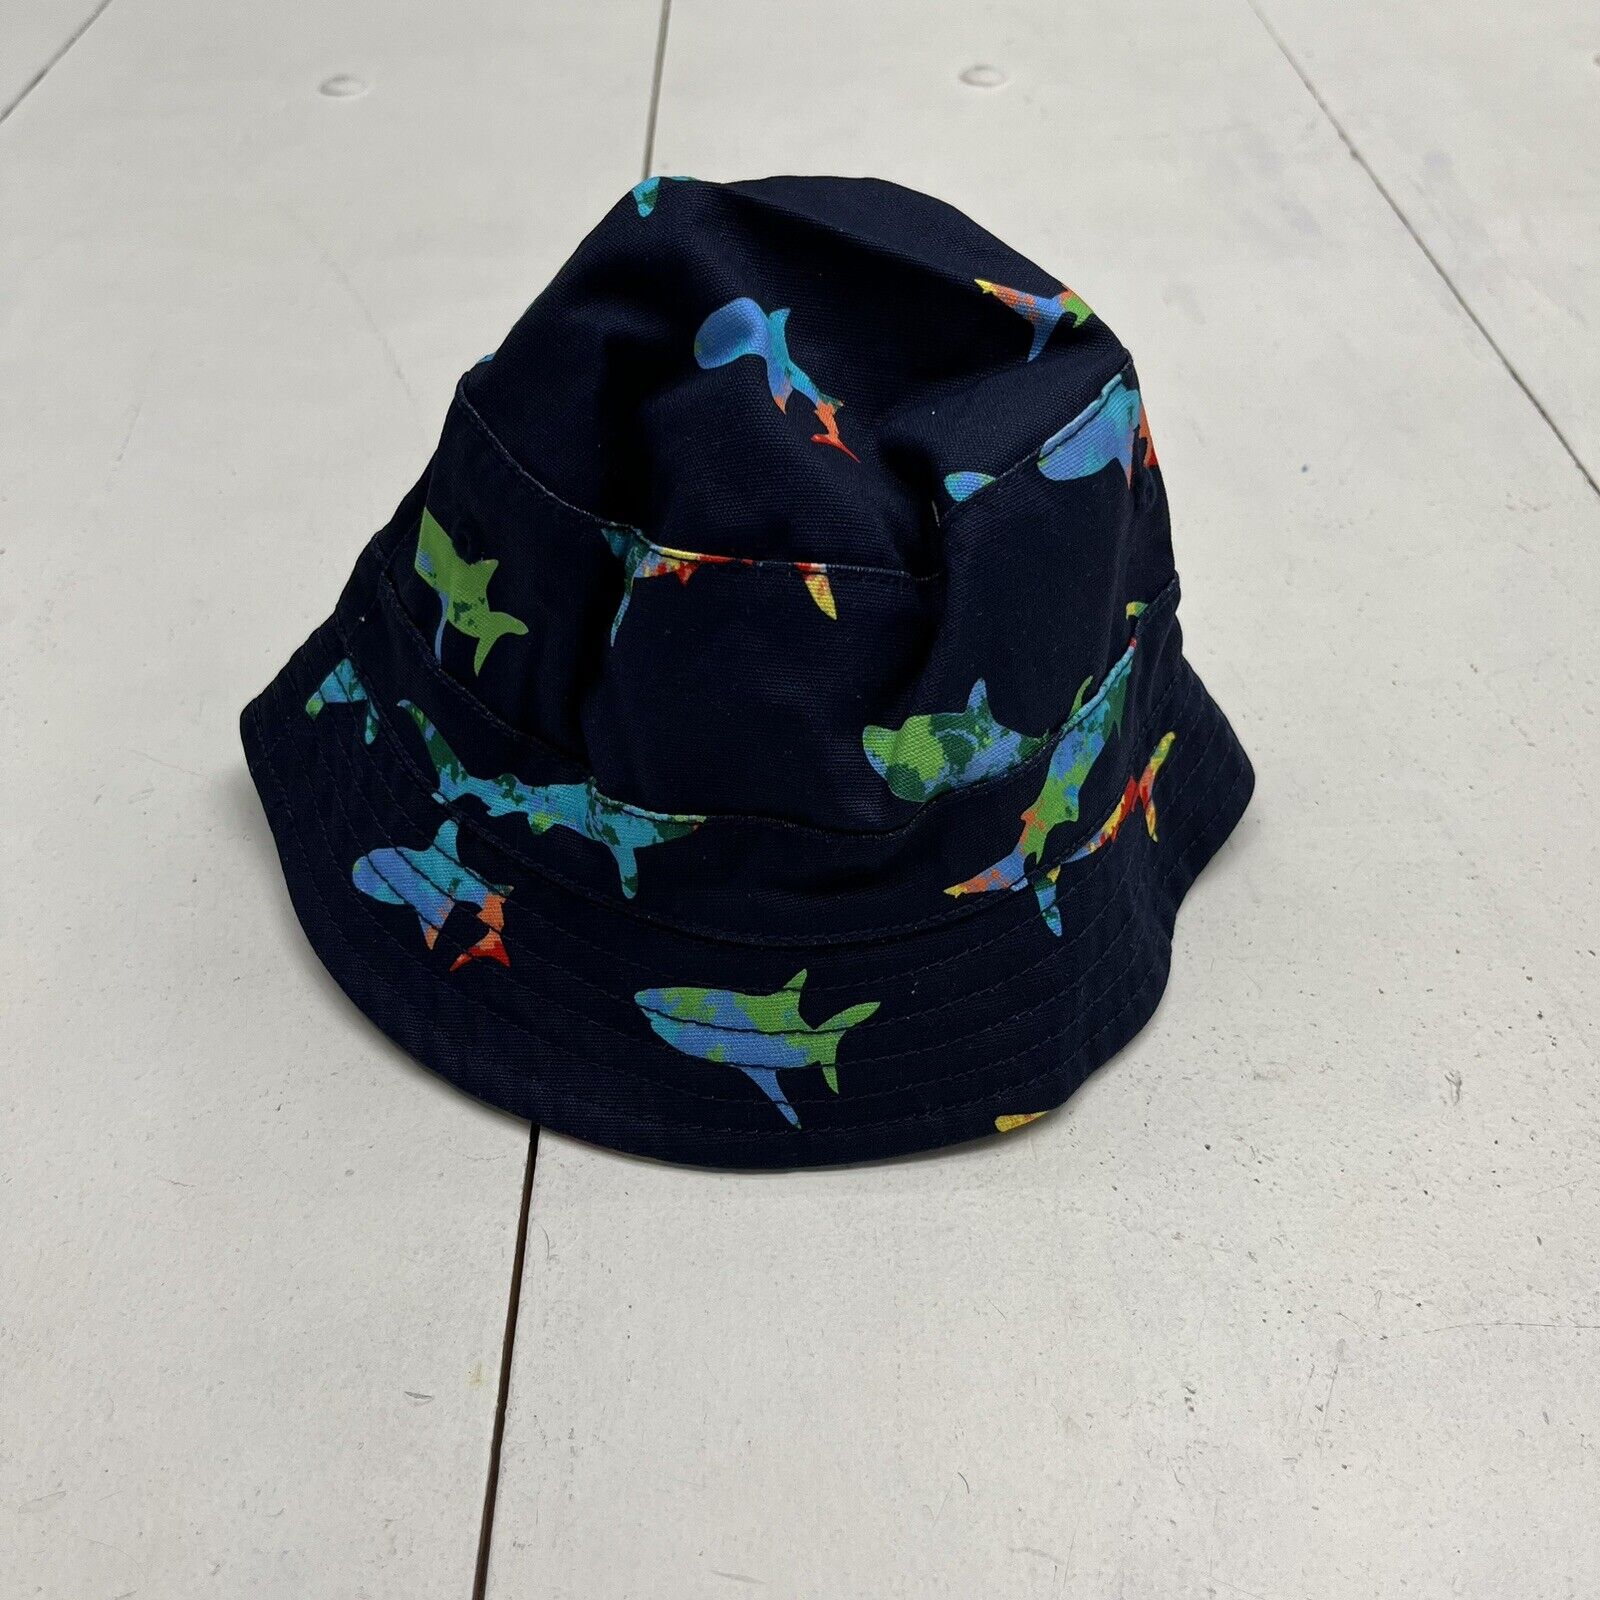 The Children's Place Multicolored Fish Bucket Hat Kids Size Small